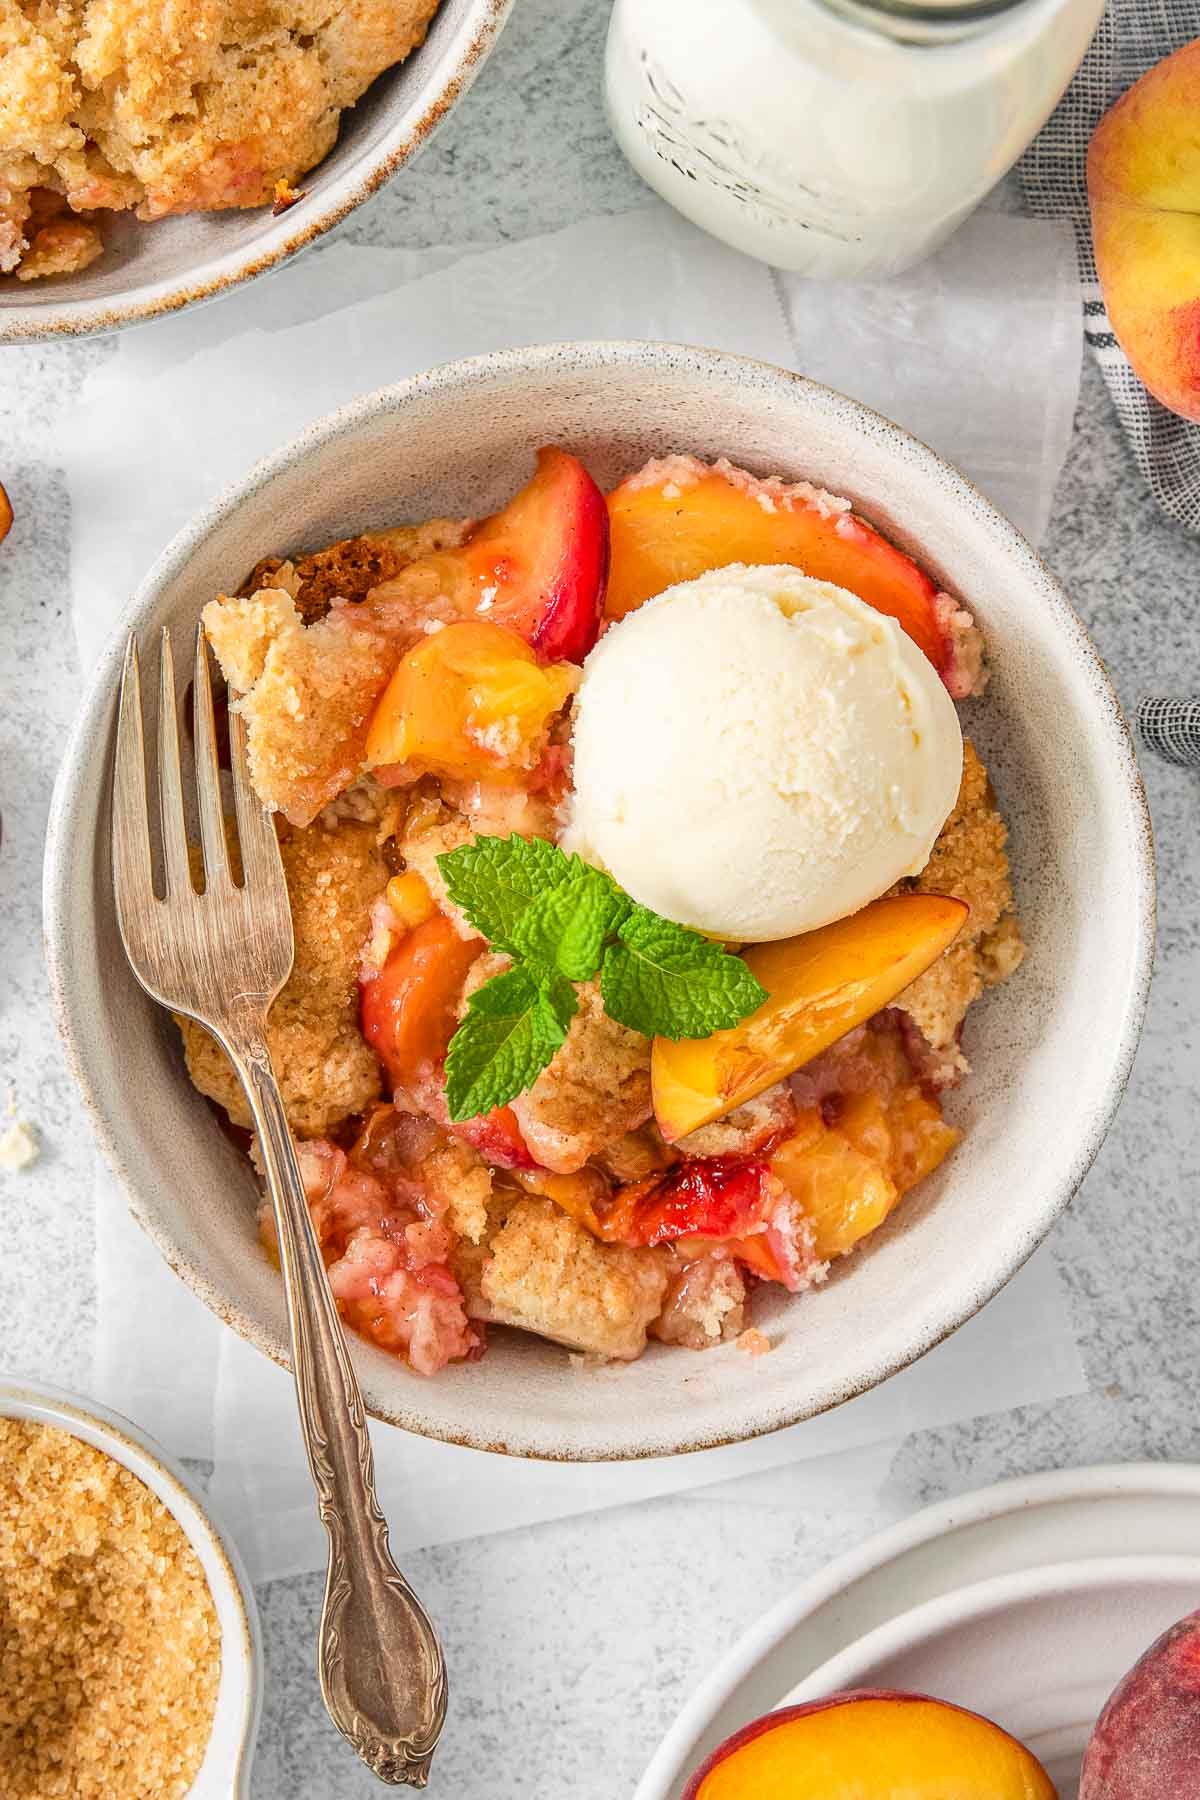 Peach cobbler in a white bowl topped with ice cream.